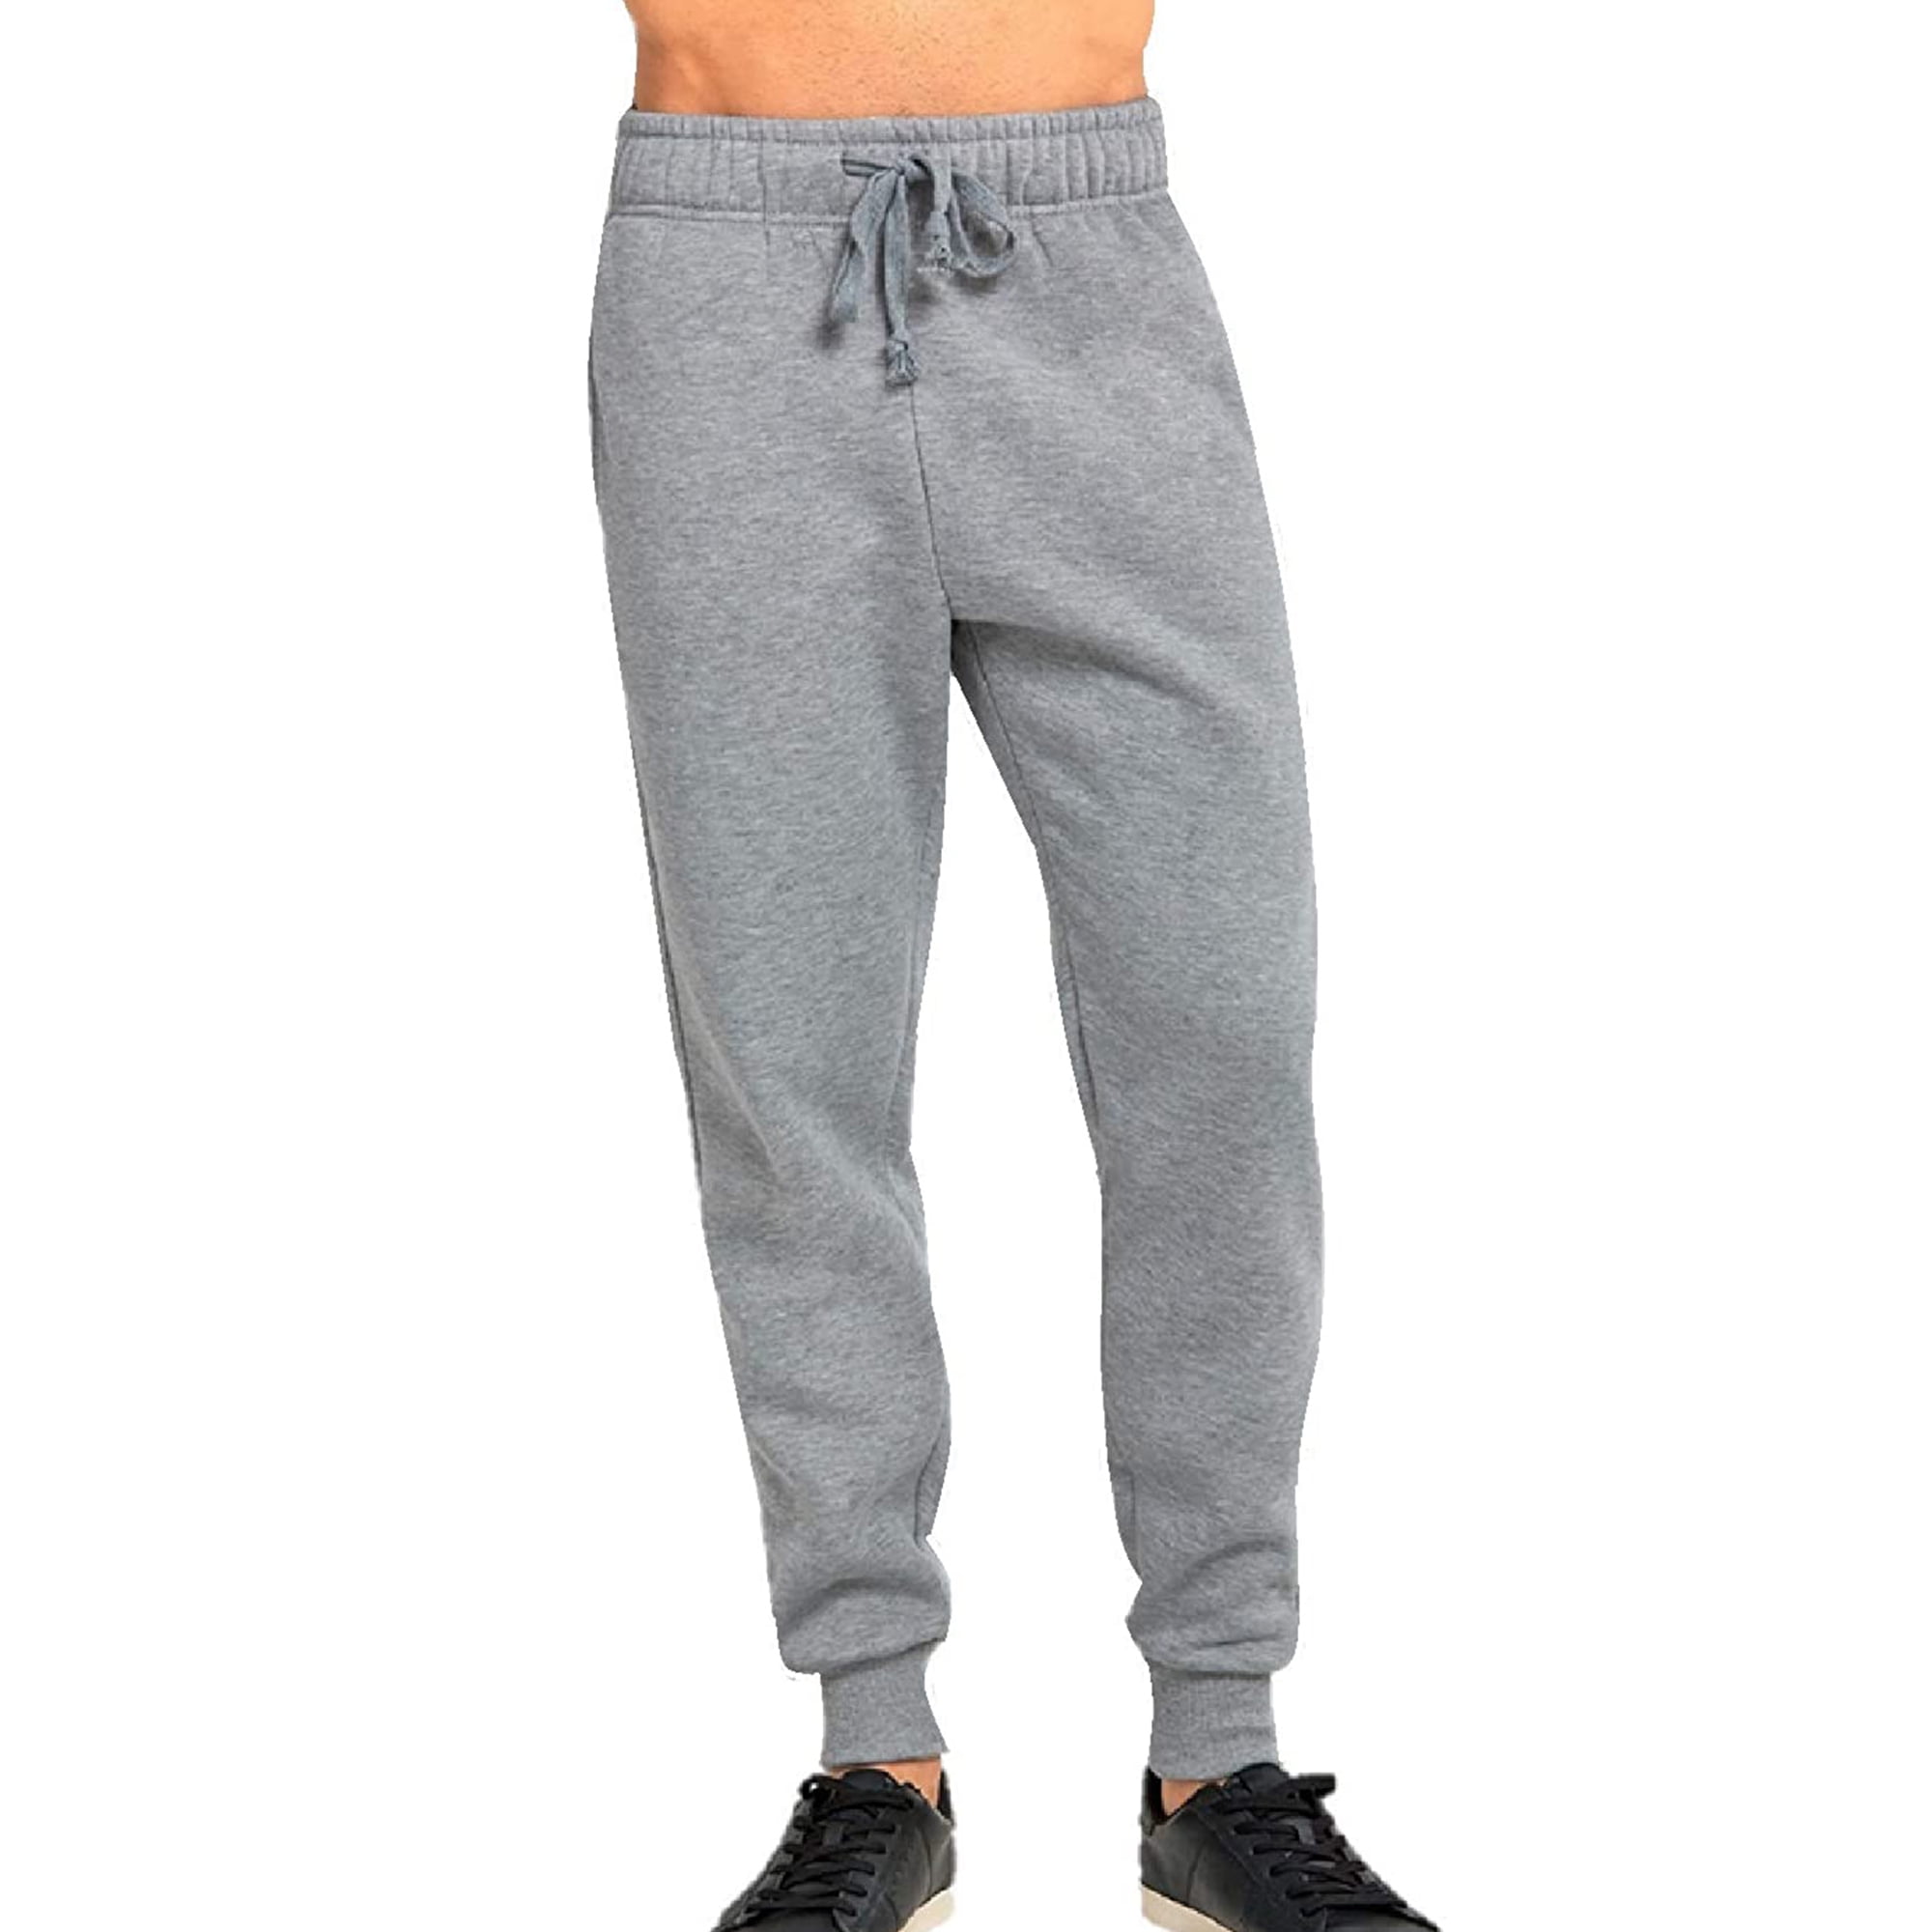 OVERSIZE SOLID COLOR LOOSE FIT JOGGERS DRAWSTRING TRACK PANTS. MEN'S B –  MASCULINITY